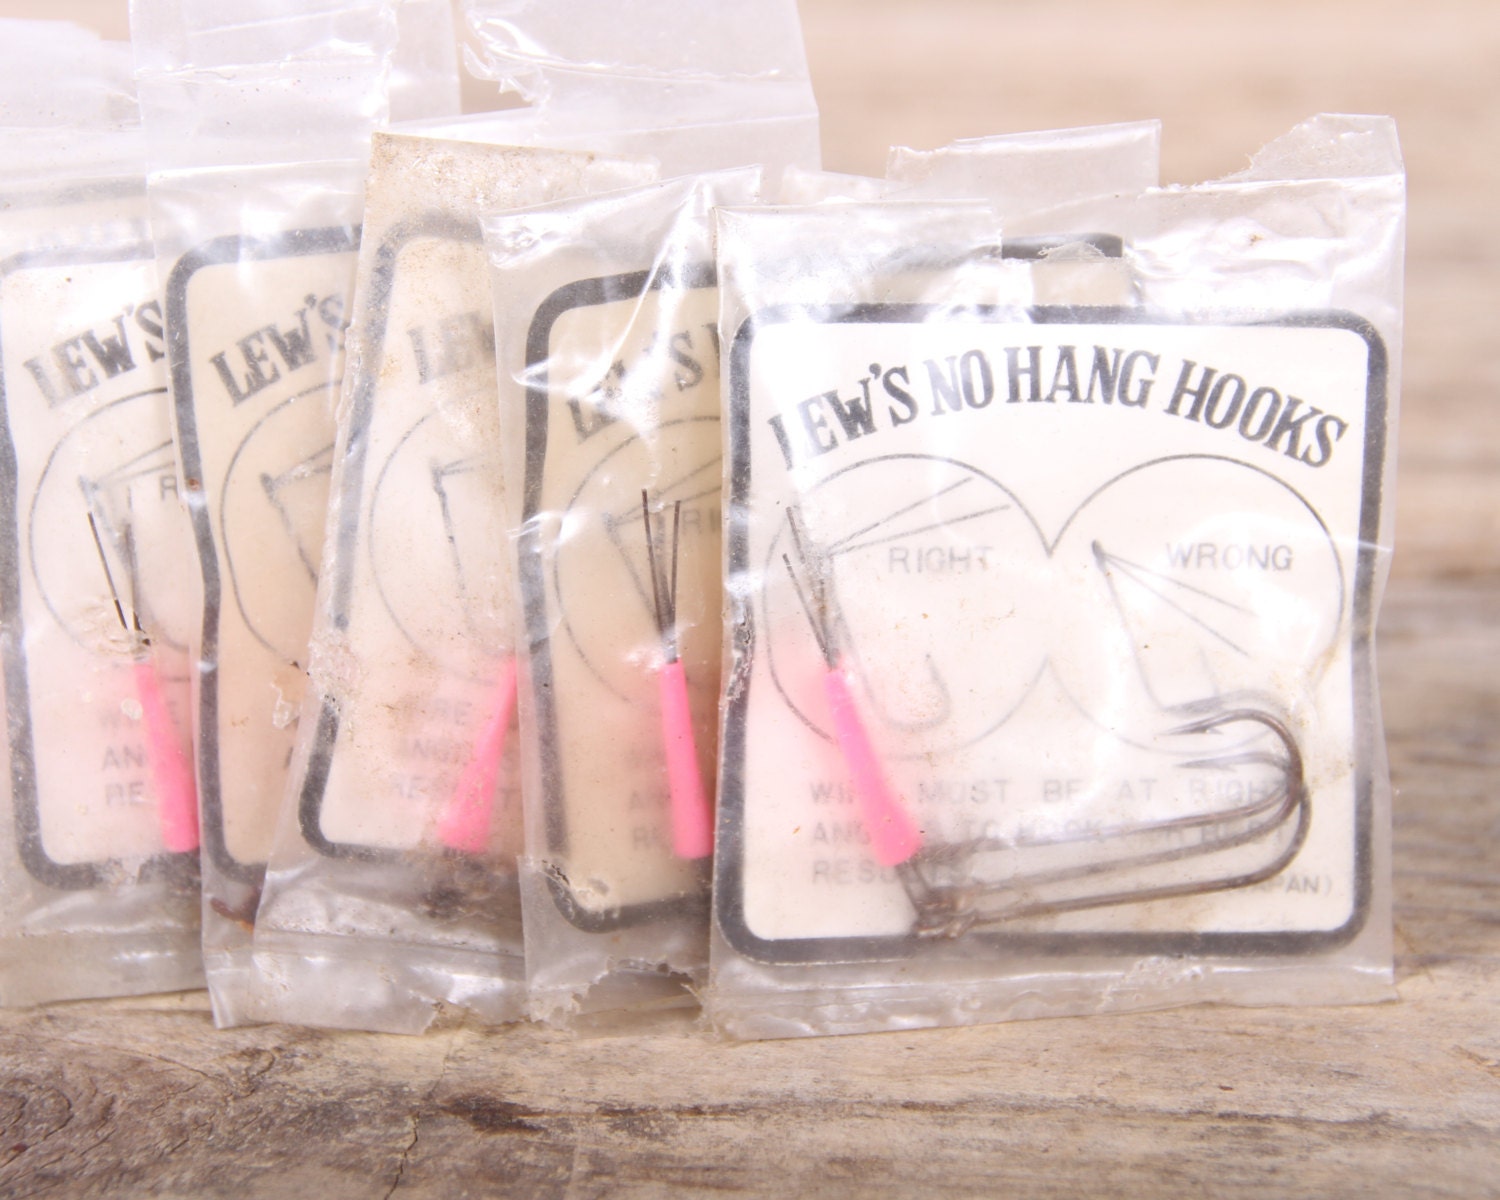 Vintage Lew's No Hang Hooks / Lot of 10 Old New Stock Fishing